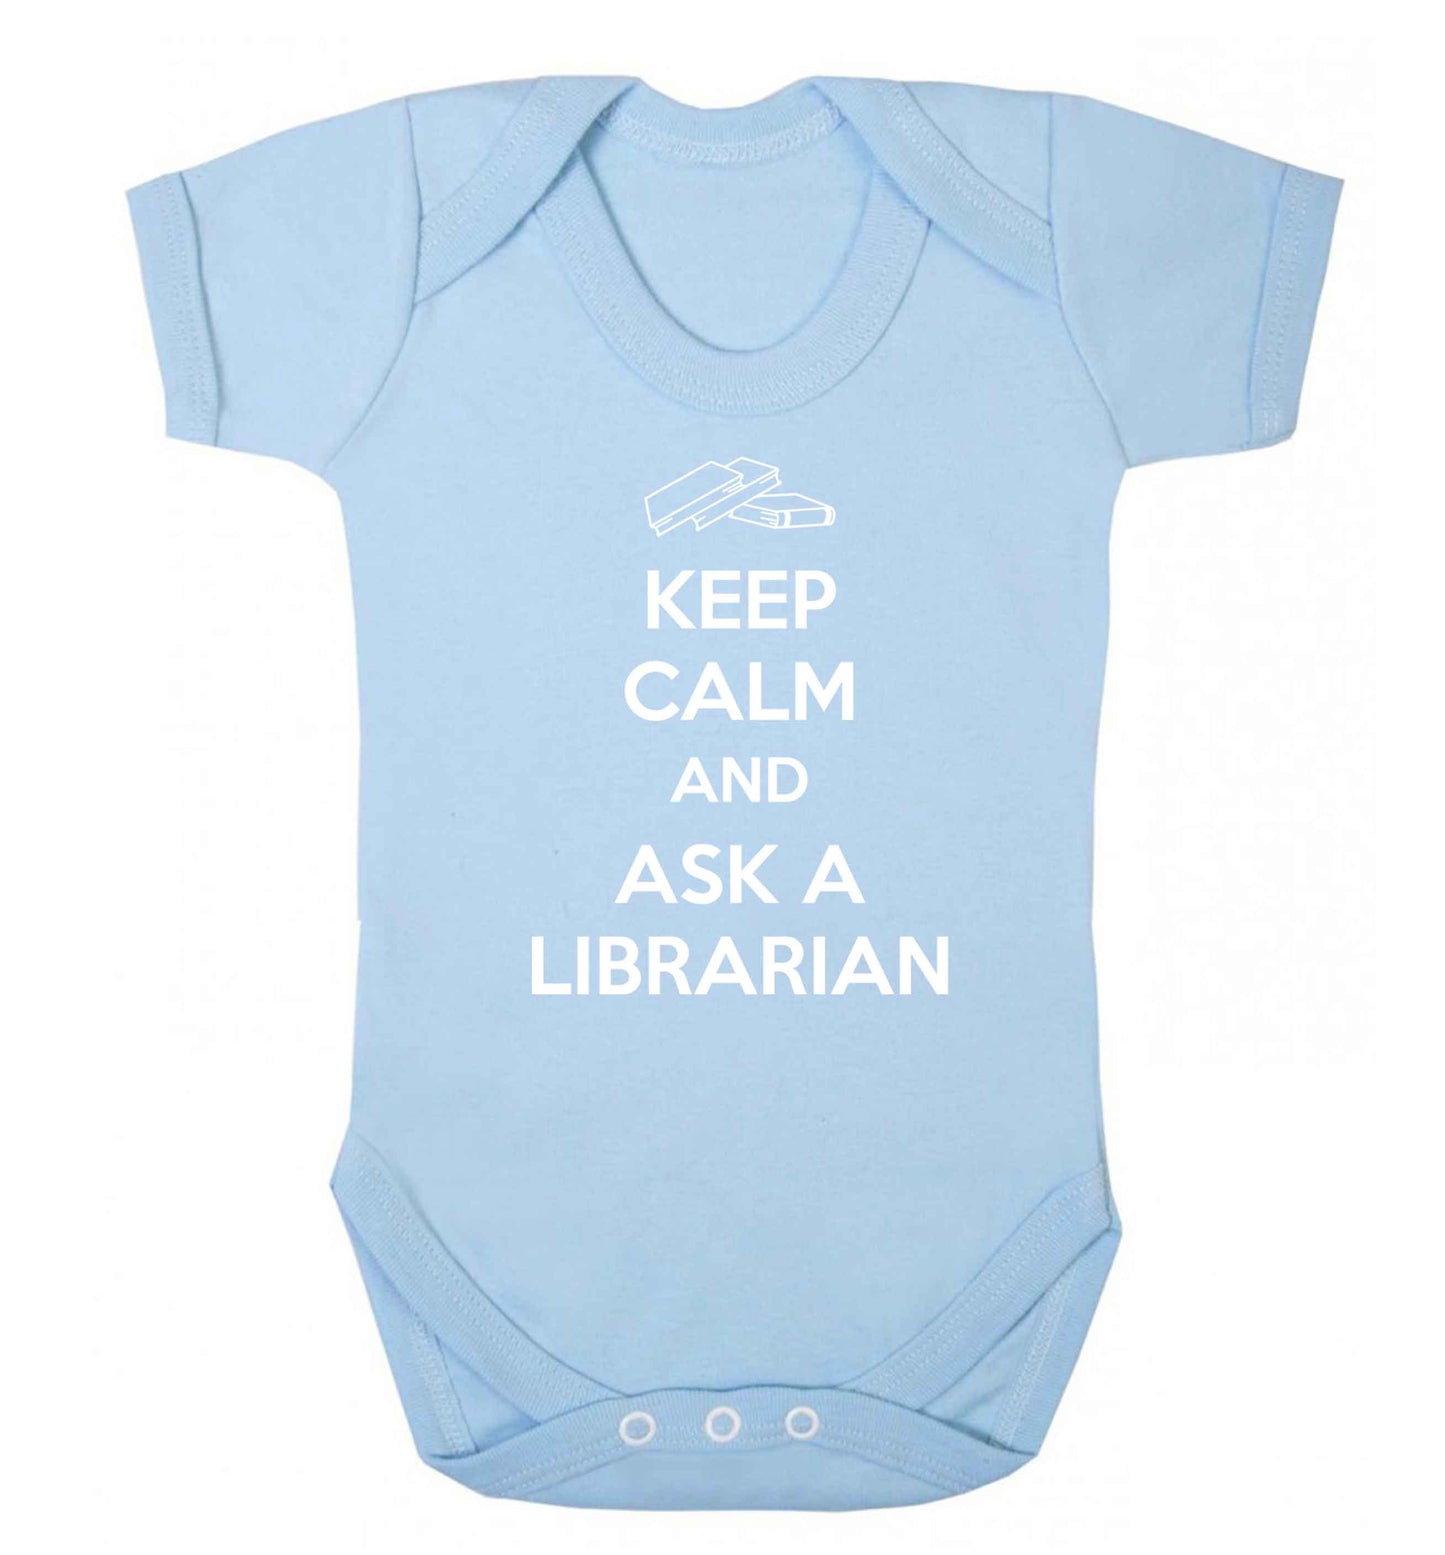 Keep calm and ask a librarian Baby Vest pale blue 18-24 months